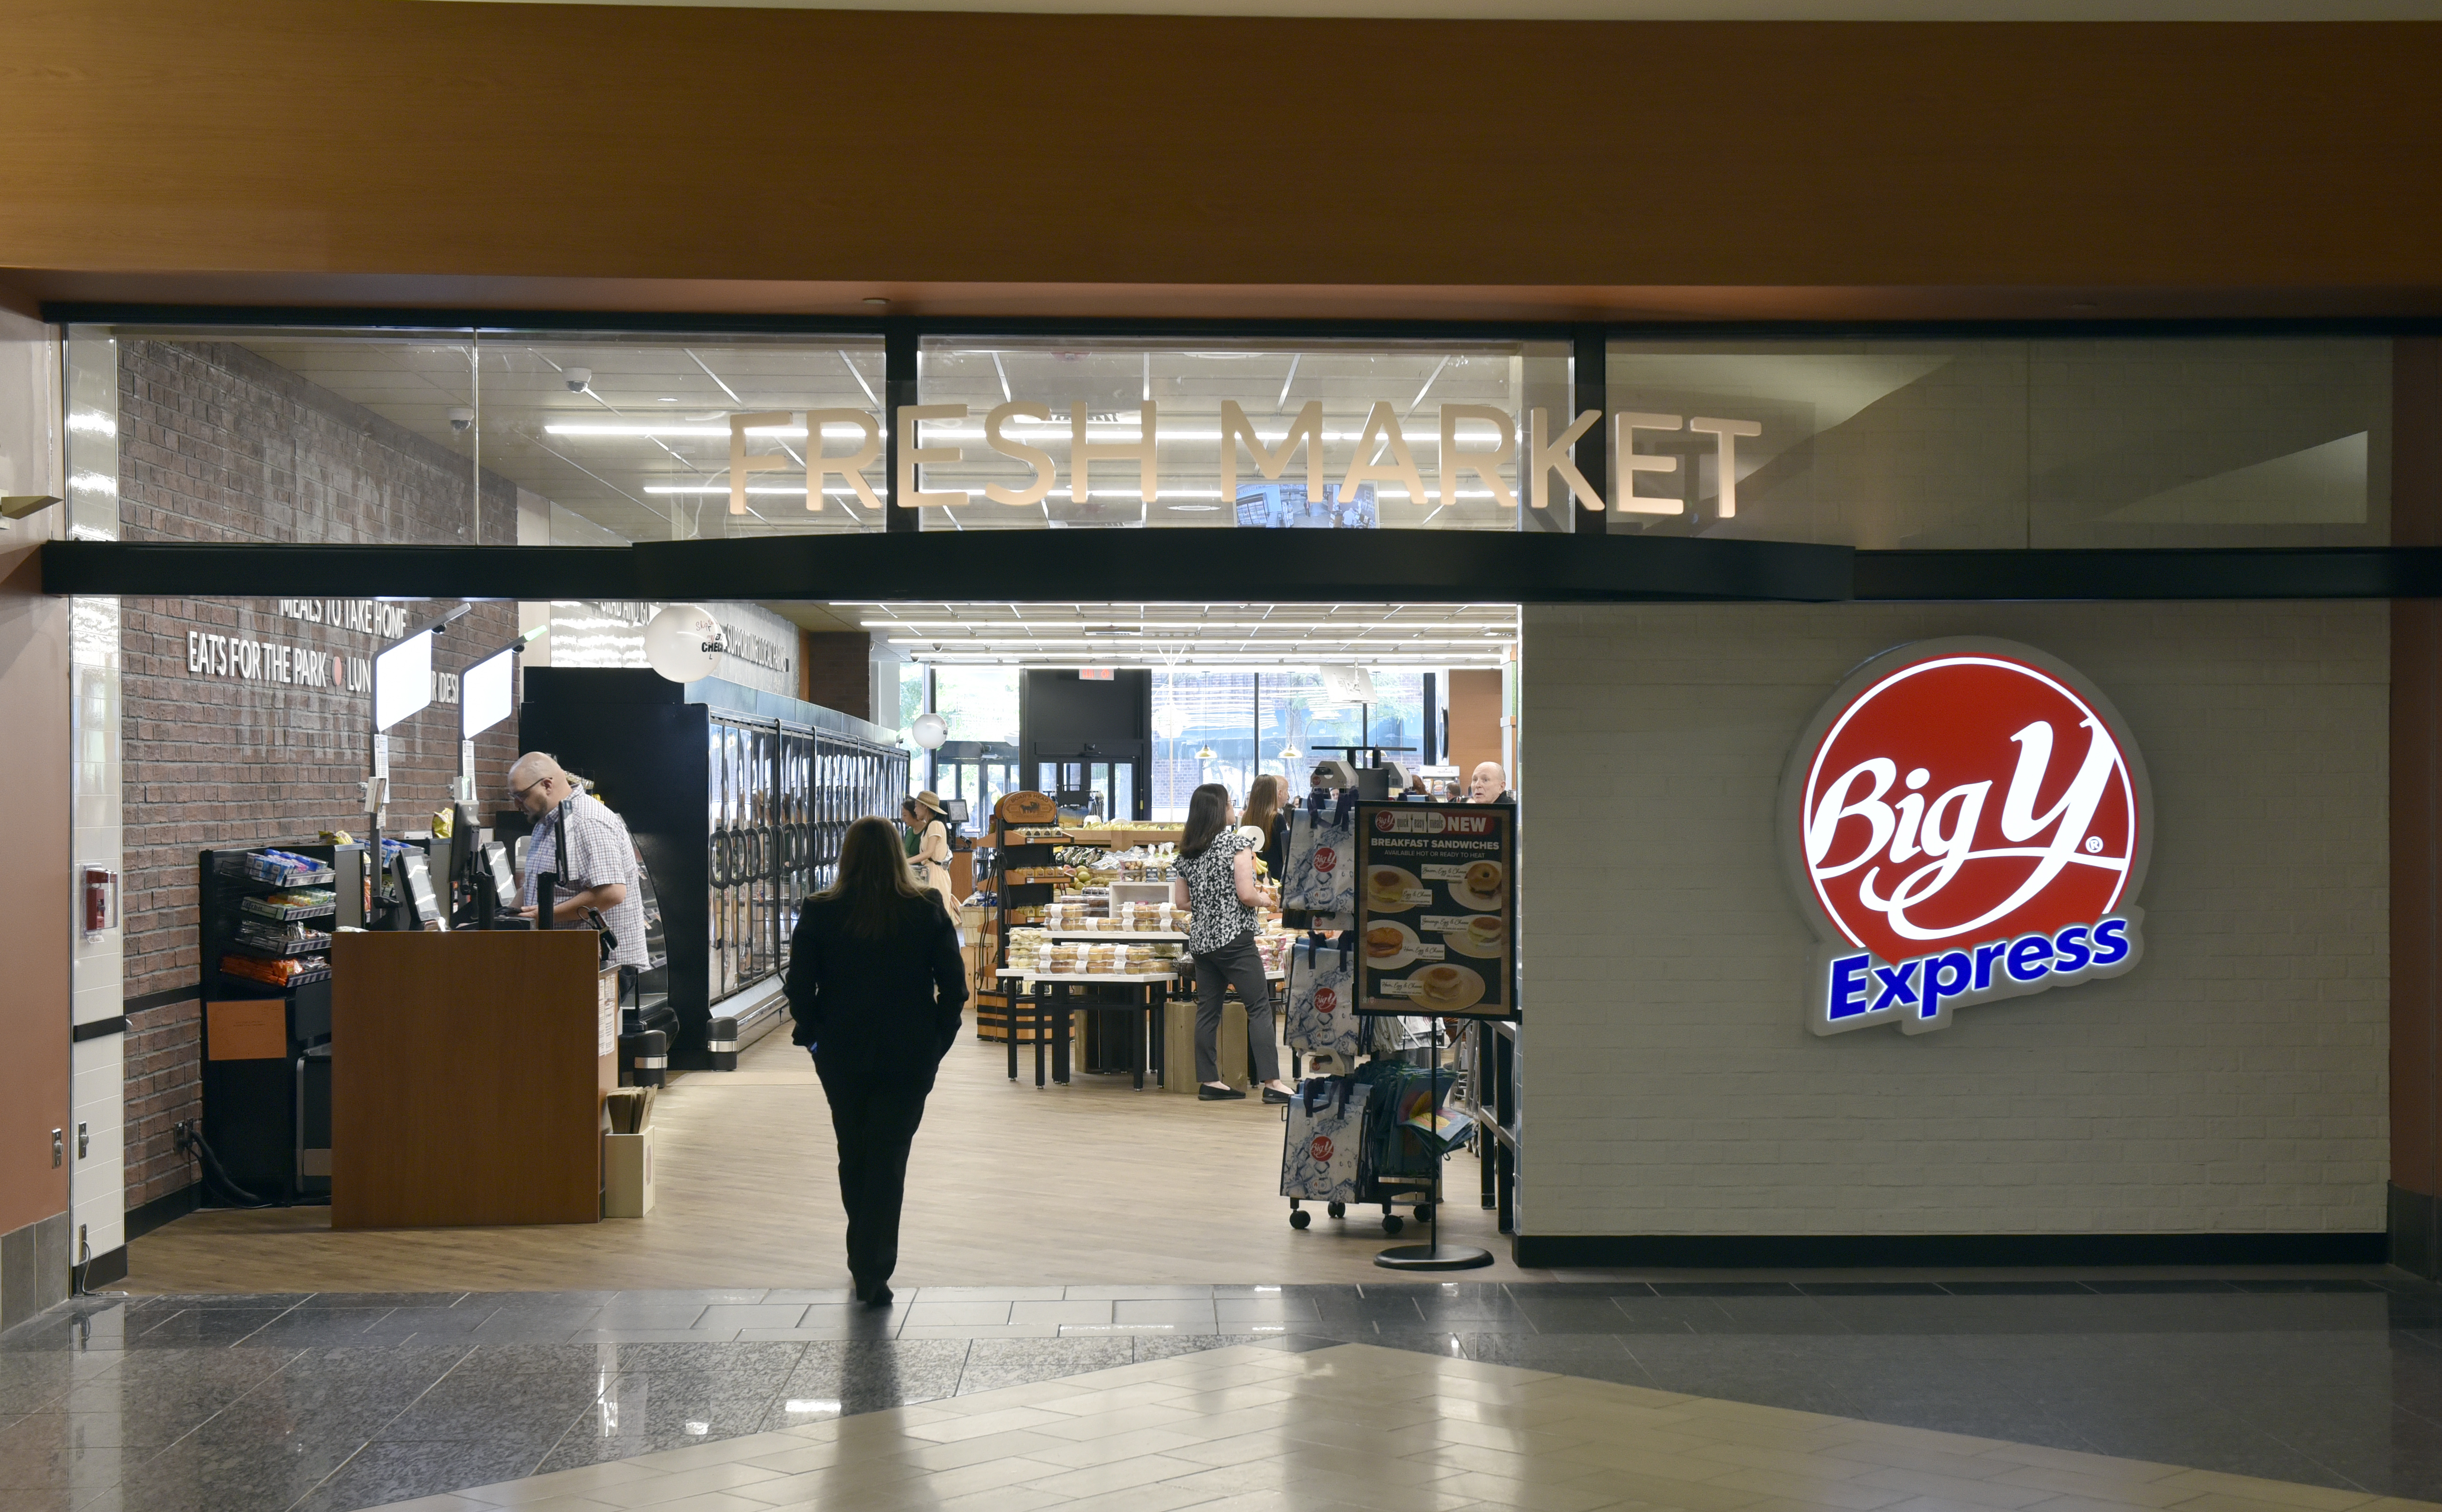 Small store in a tall building: Big Y opens in Tower Square